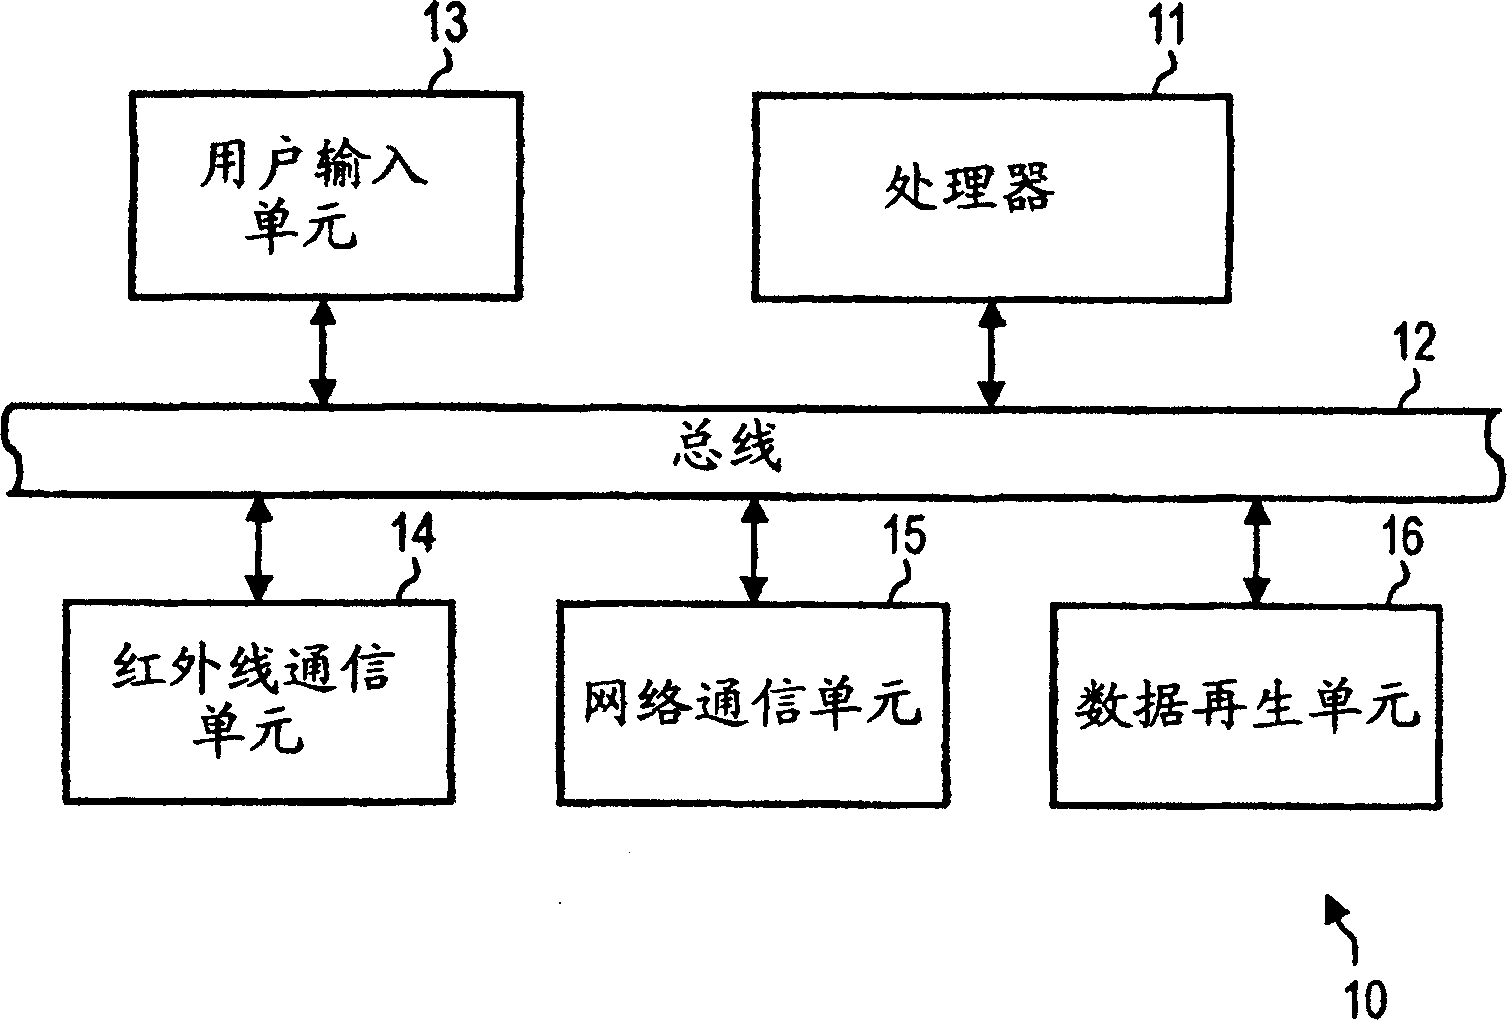 Remote control system, remote control method, remote controller and electronic device